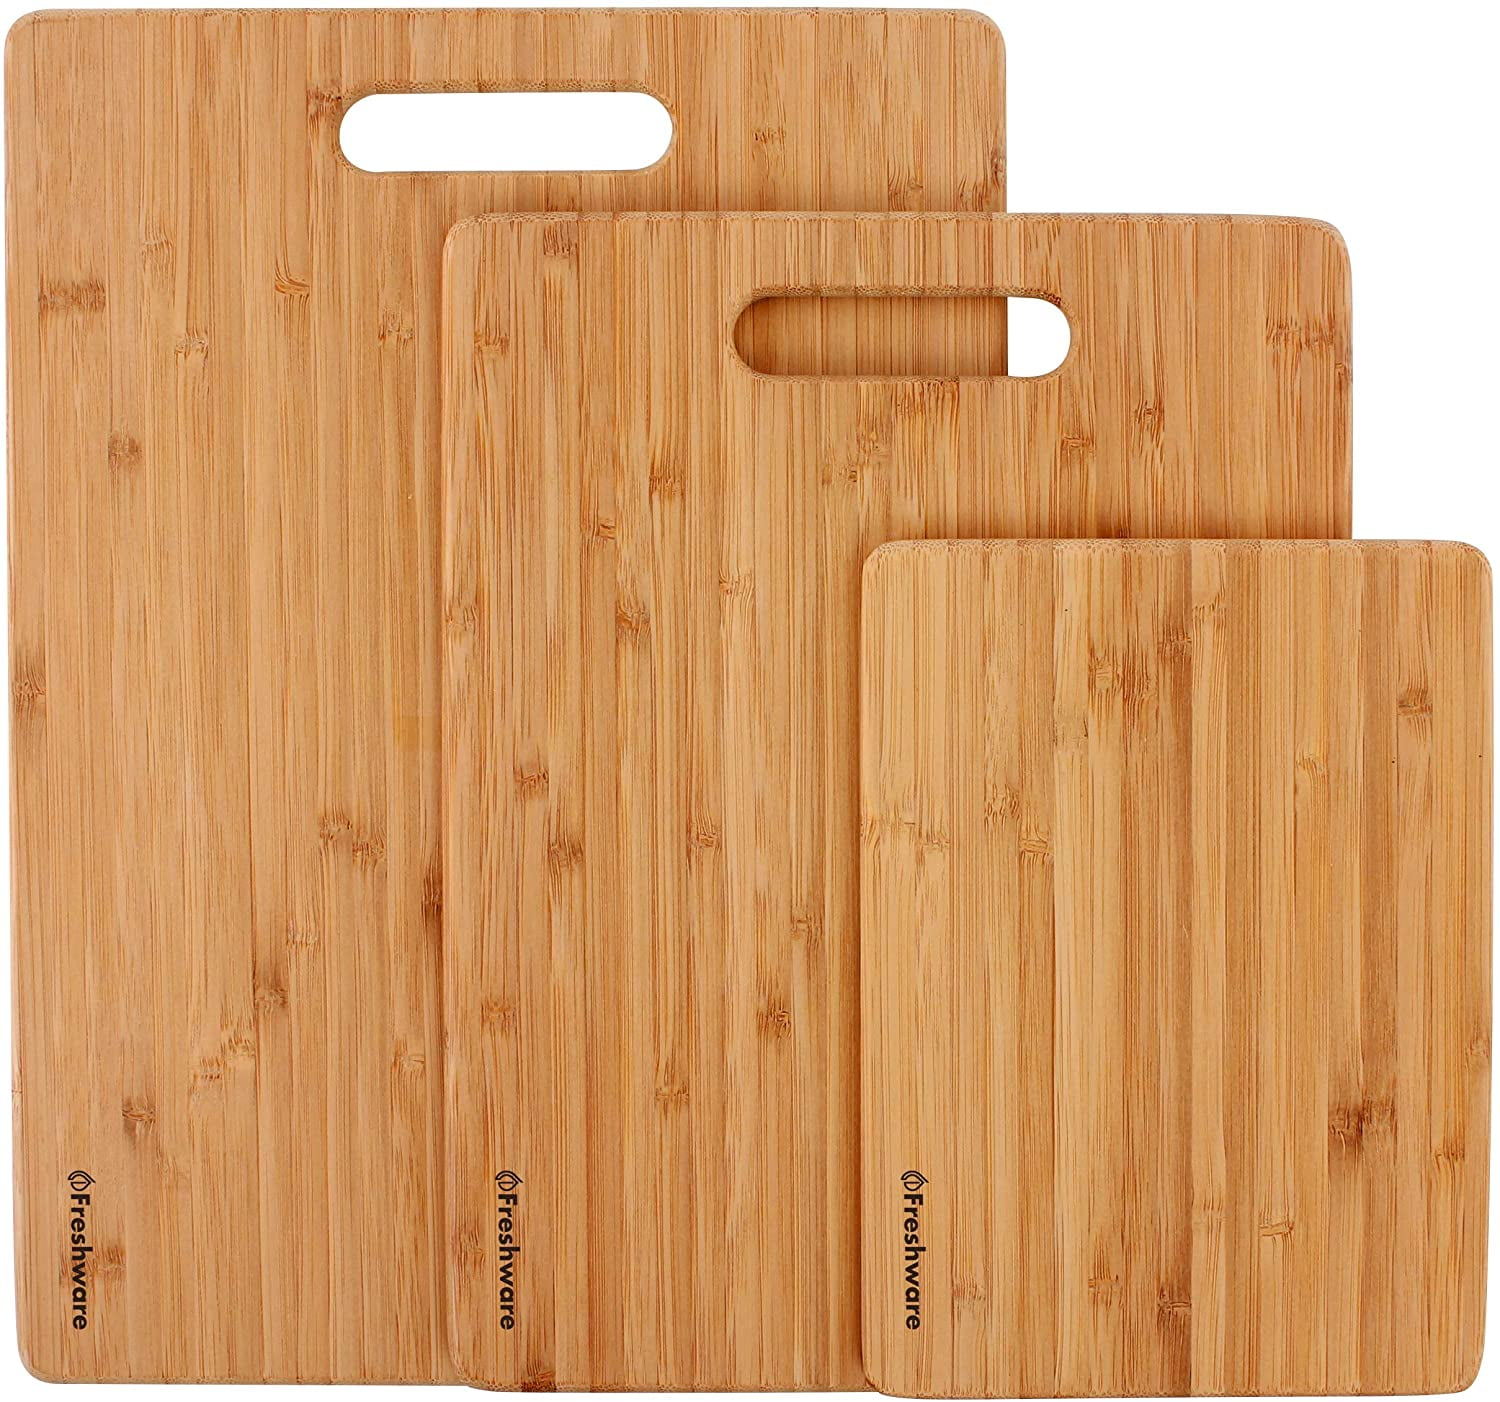 Gorilla Grip Original Oversized Cutting Board, 3 Piece, BPA Free, Juice Grooves, Larger Thicker Boards, Easy Grip Handle, Dishwa, Bamboo